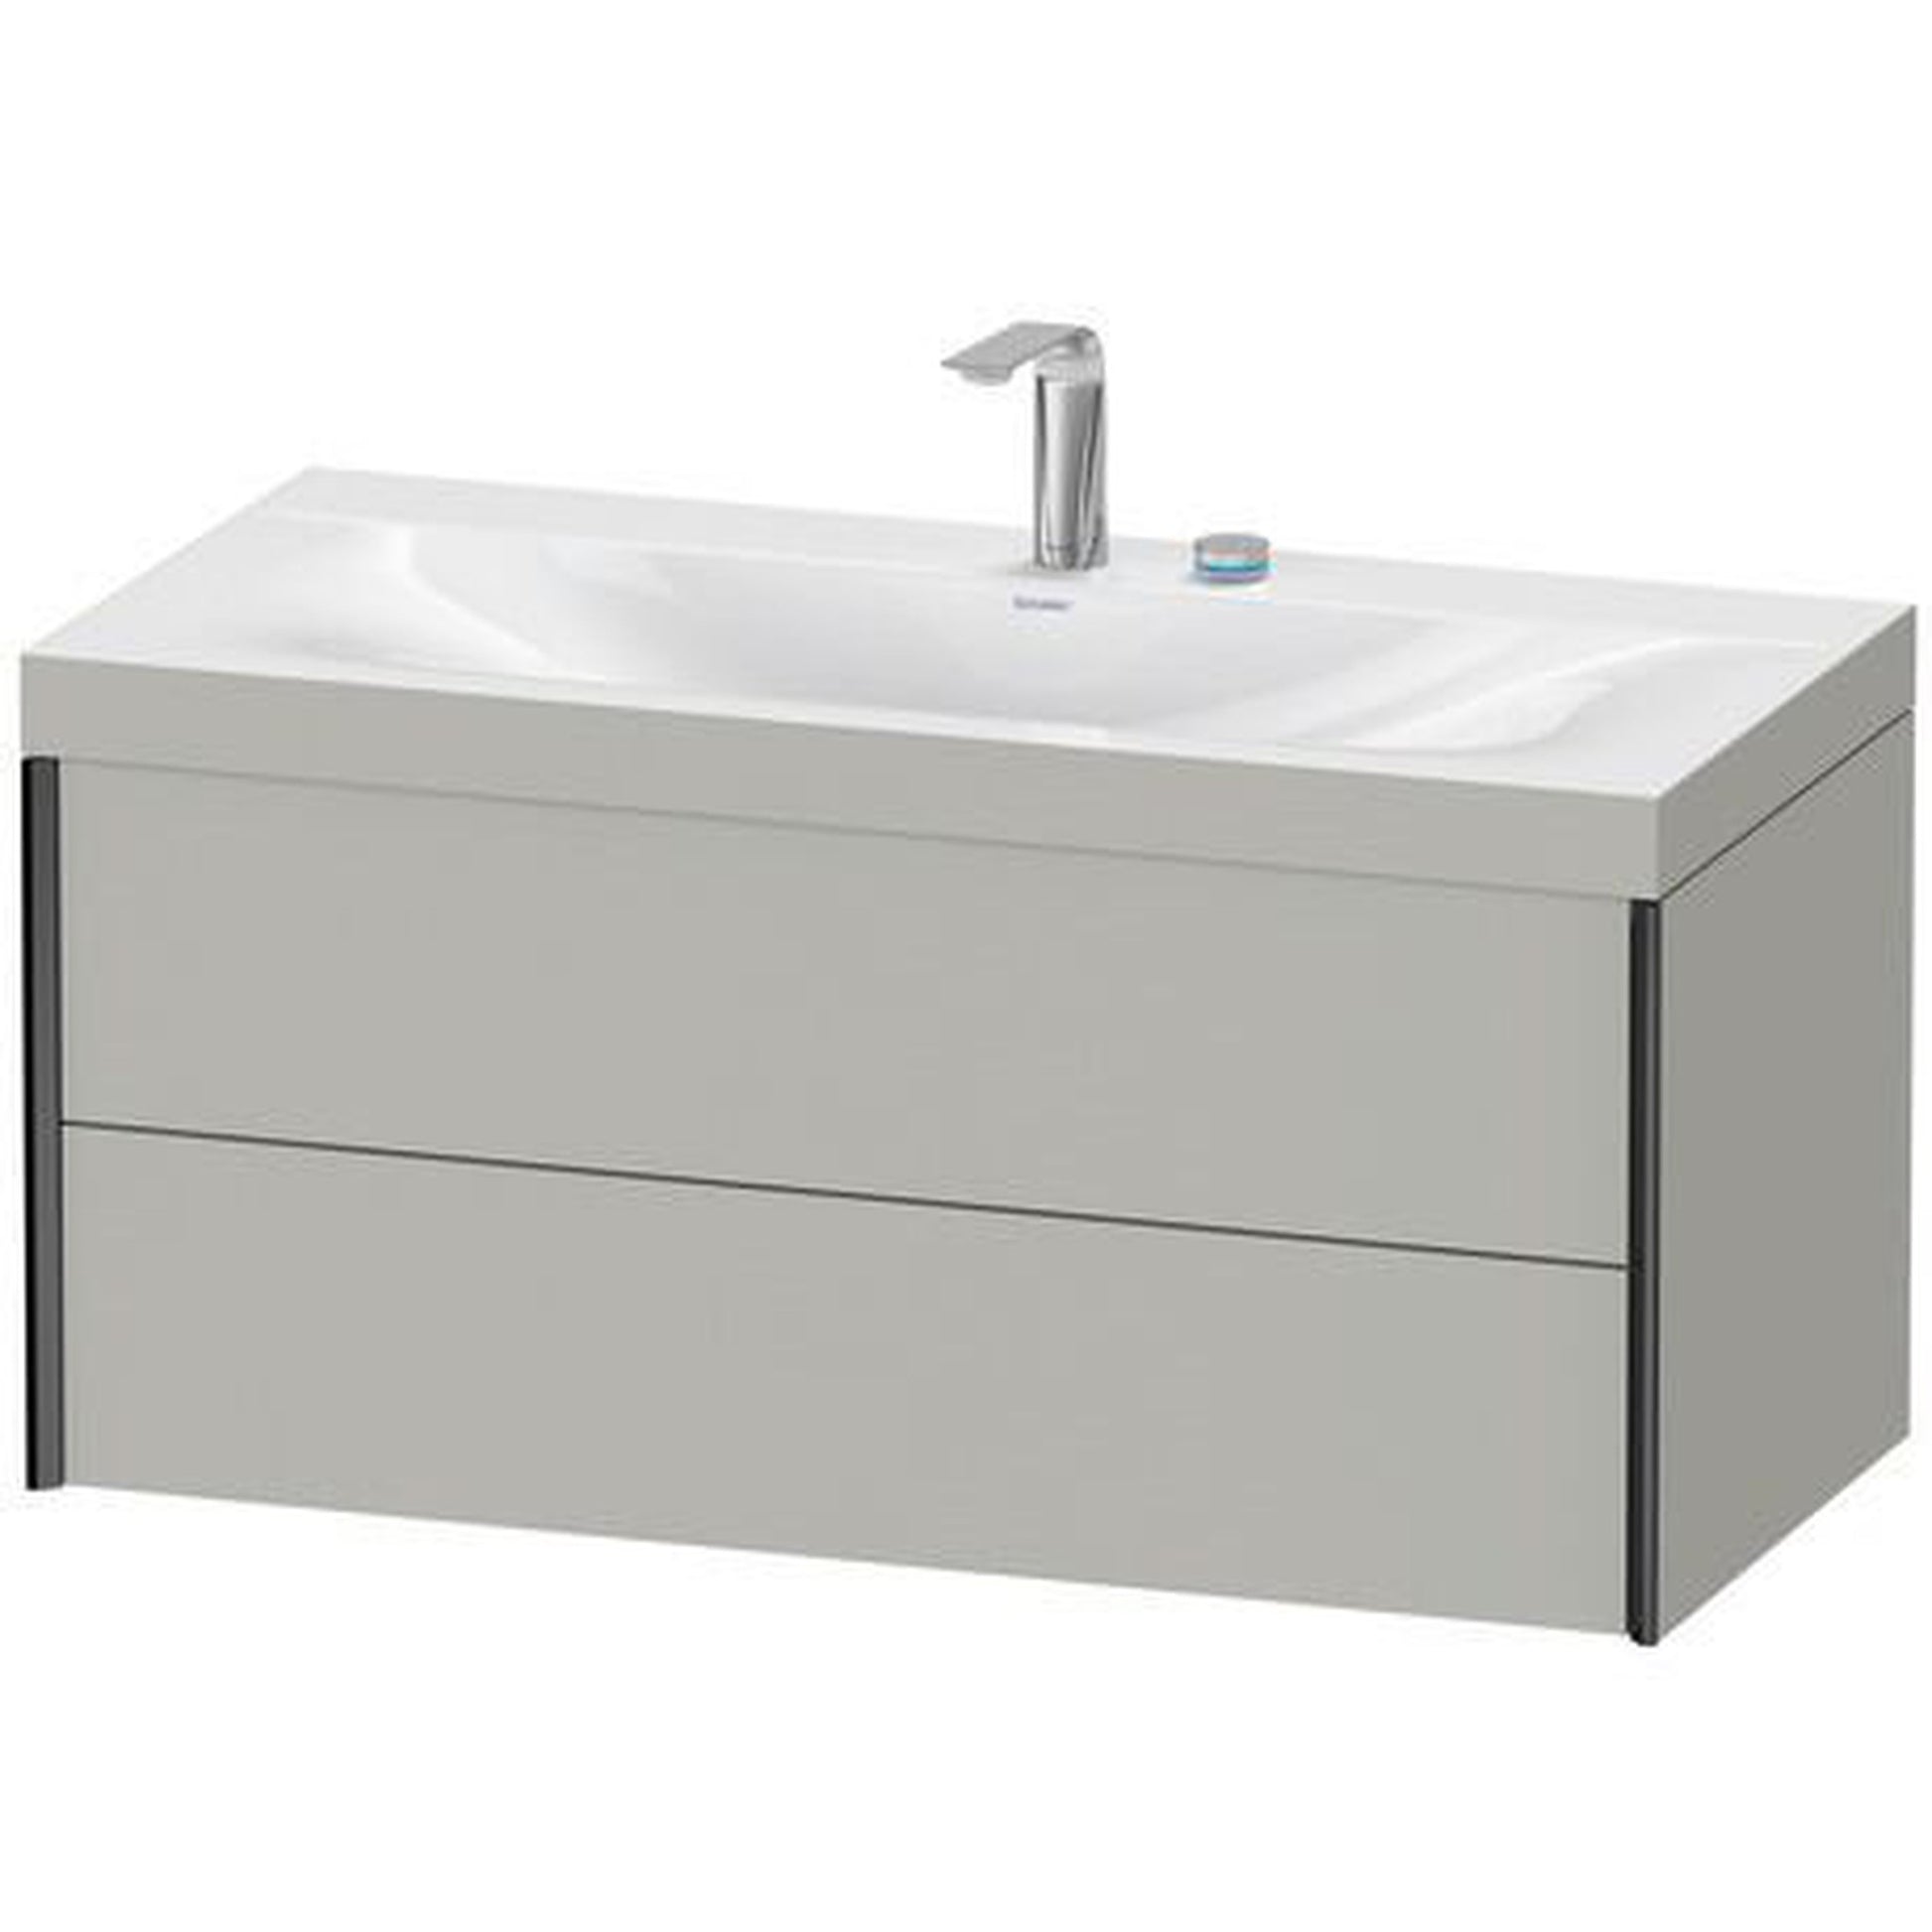 Duravit Xviu 39" x 20" x 19" Two Drawer C-Bonded Wall-Mount Vanity Kit With Two Tap Holes, Concrete Gray (XV4616EB207C)